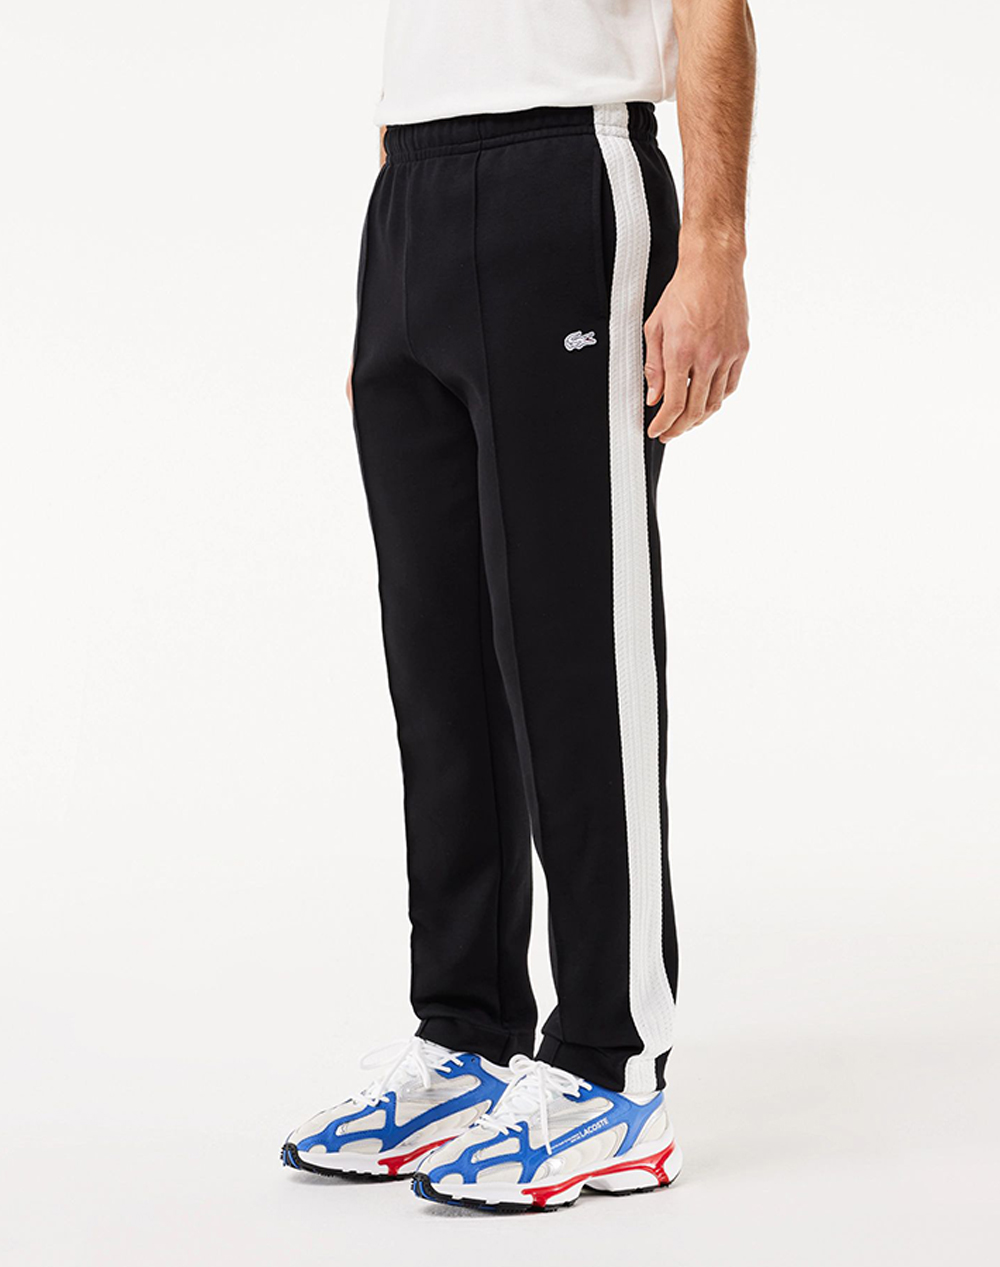 LACOSTE ΠΑΝΤΕΛΟΝΙ ΦΟΡΜΑΣ TRACKSUIT TROUSERS 3XH7450-9M0 Black